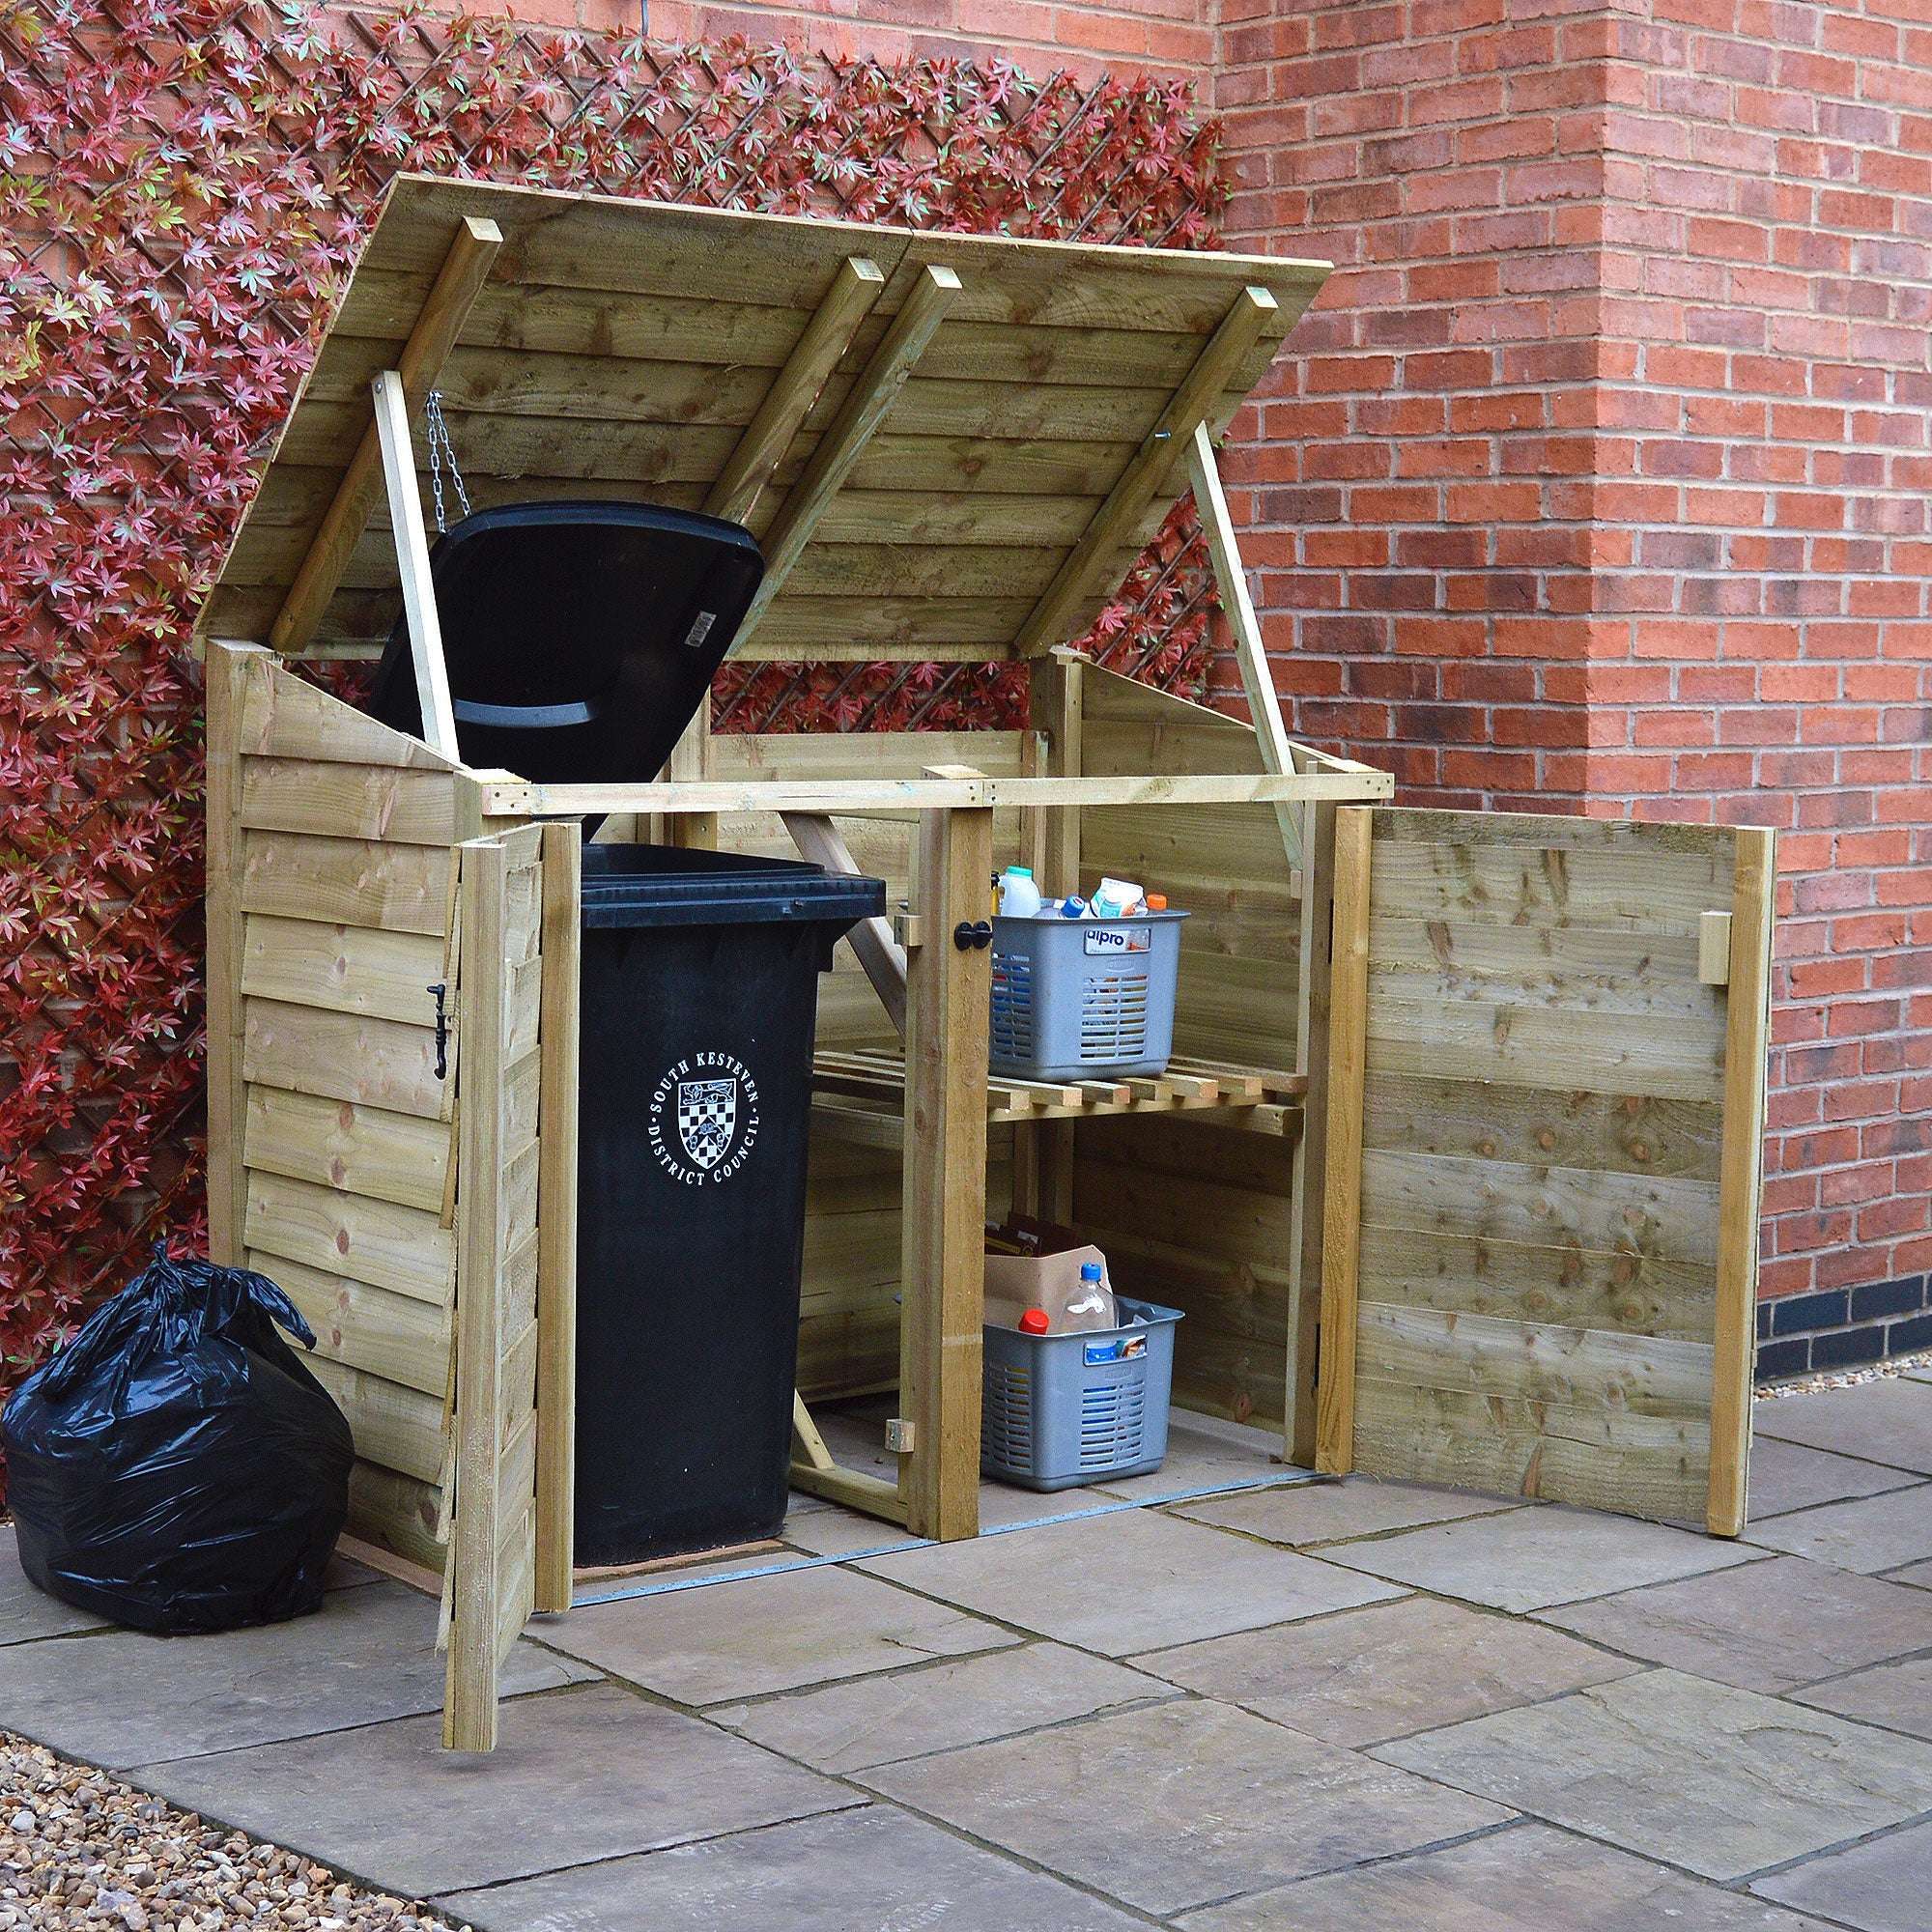 Exceptional Garden:Rutland Country Morcott Double Recycling Bin Combo Storage Unit